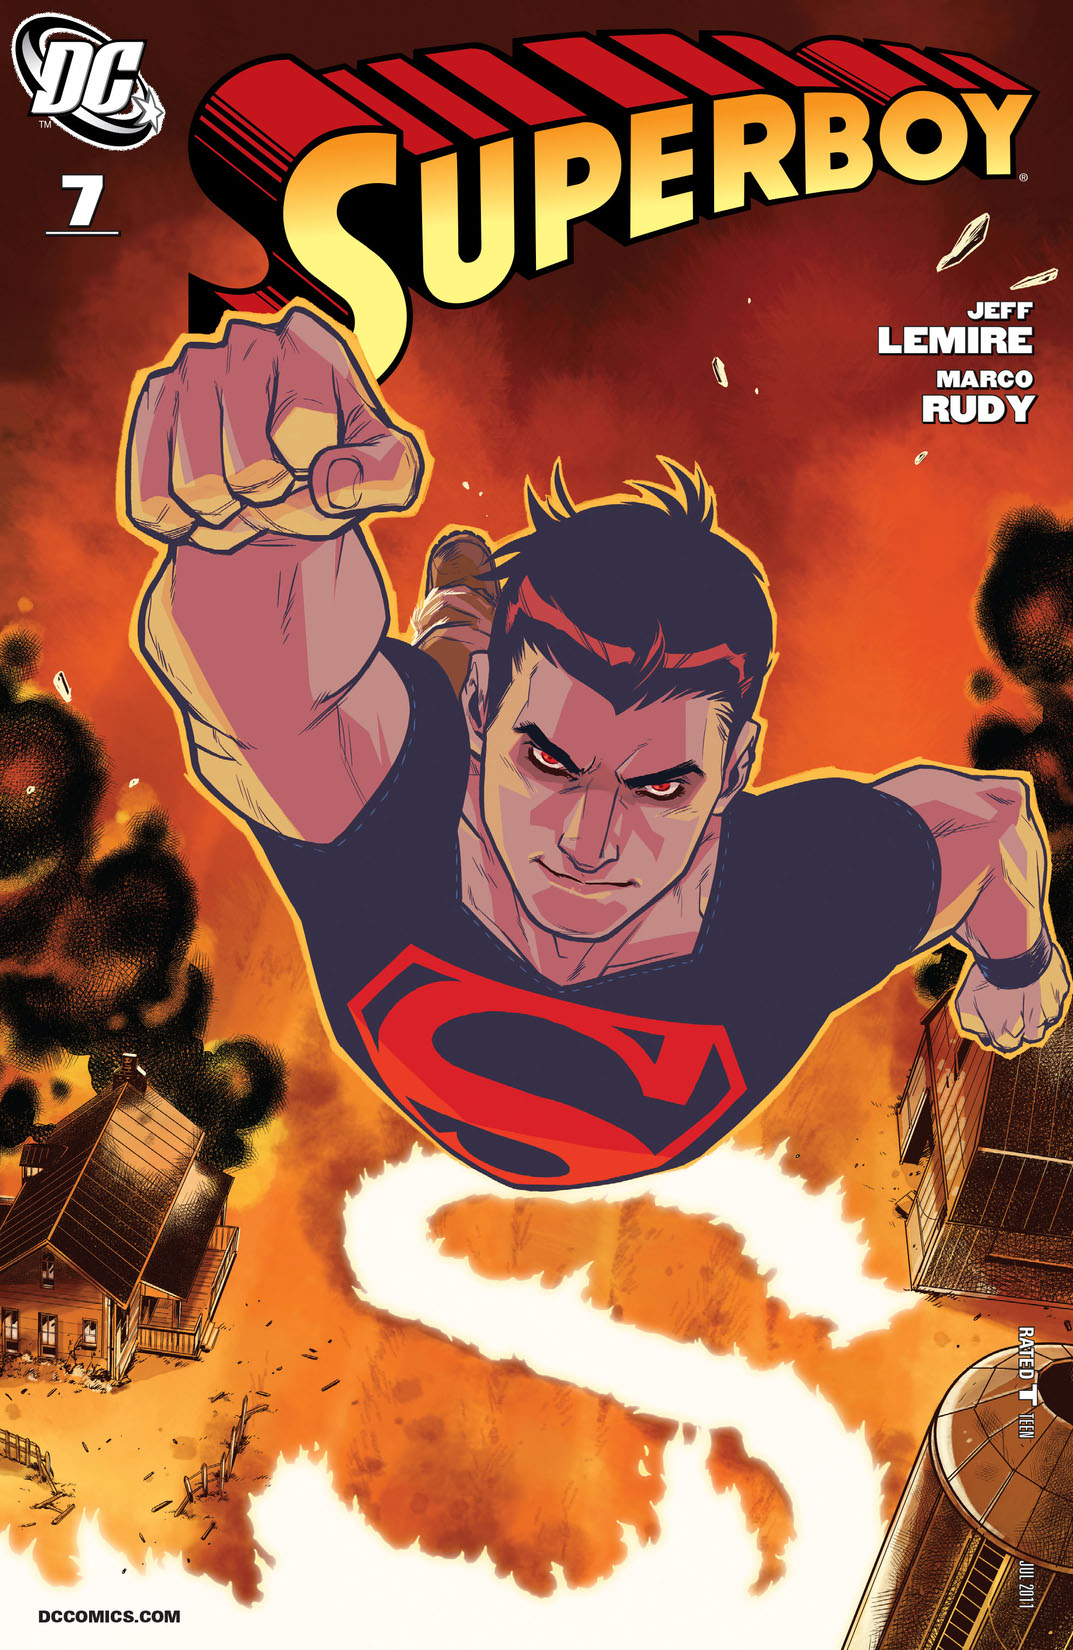 Superboy (2010-) #7 preview images